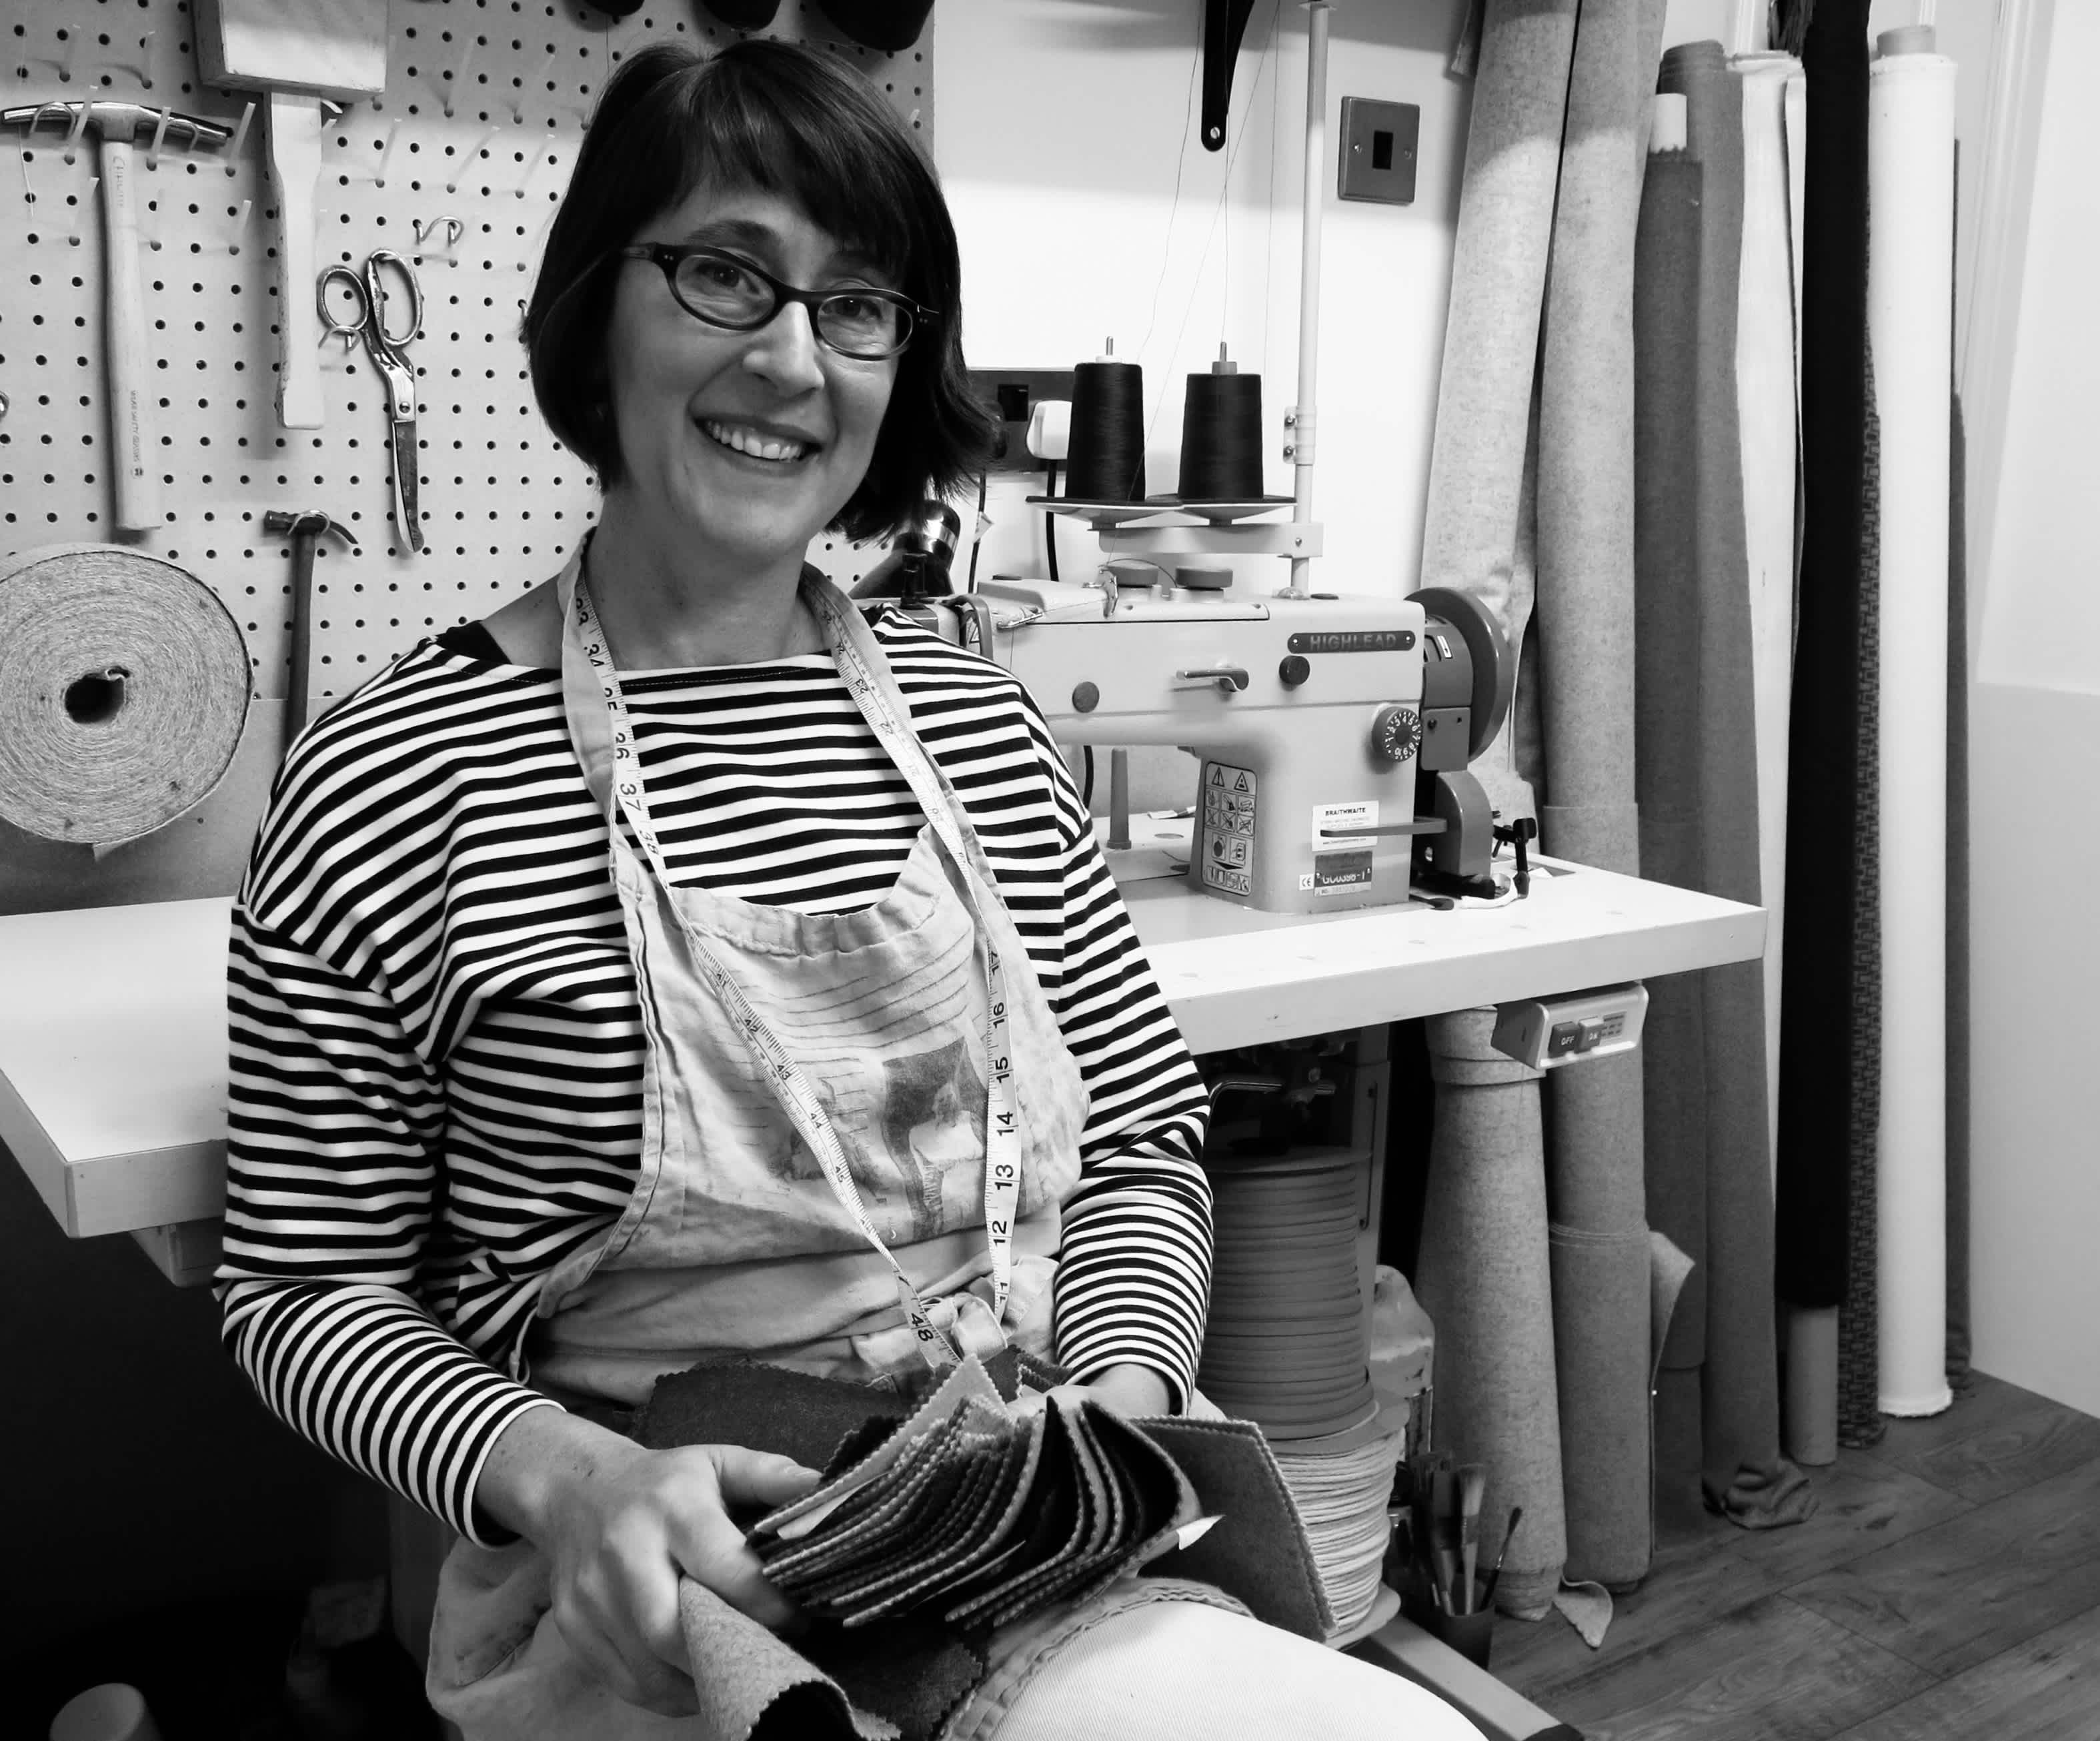 Charlotte, the founder of furniture company Twisted Loom, shares advice on how we can turn an inspired idea into a business.